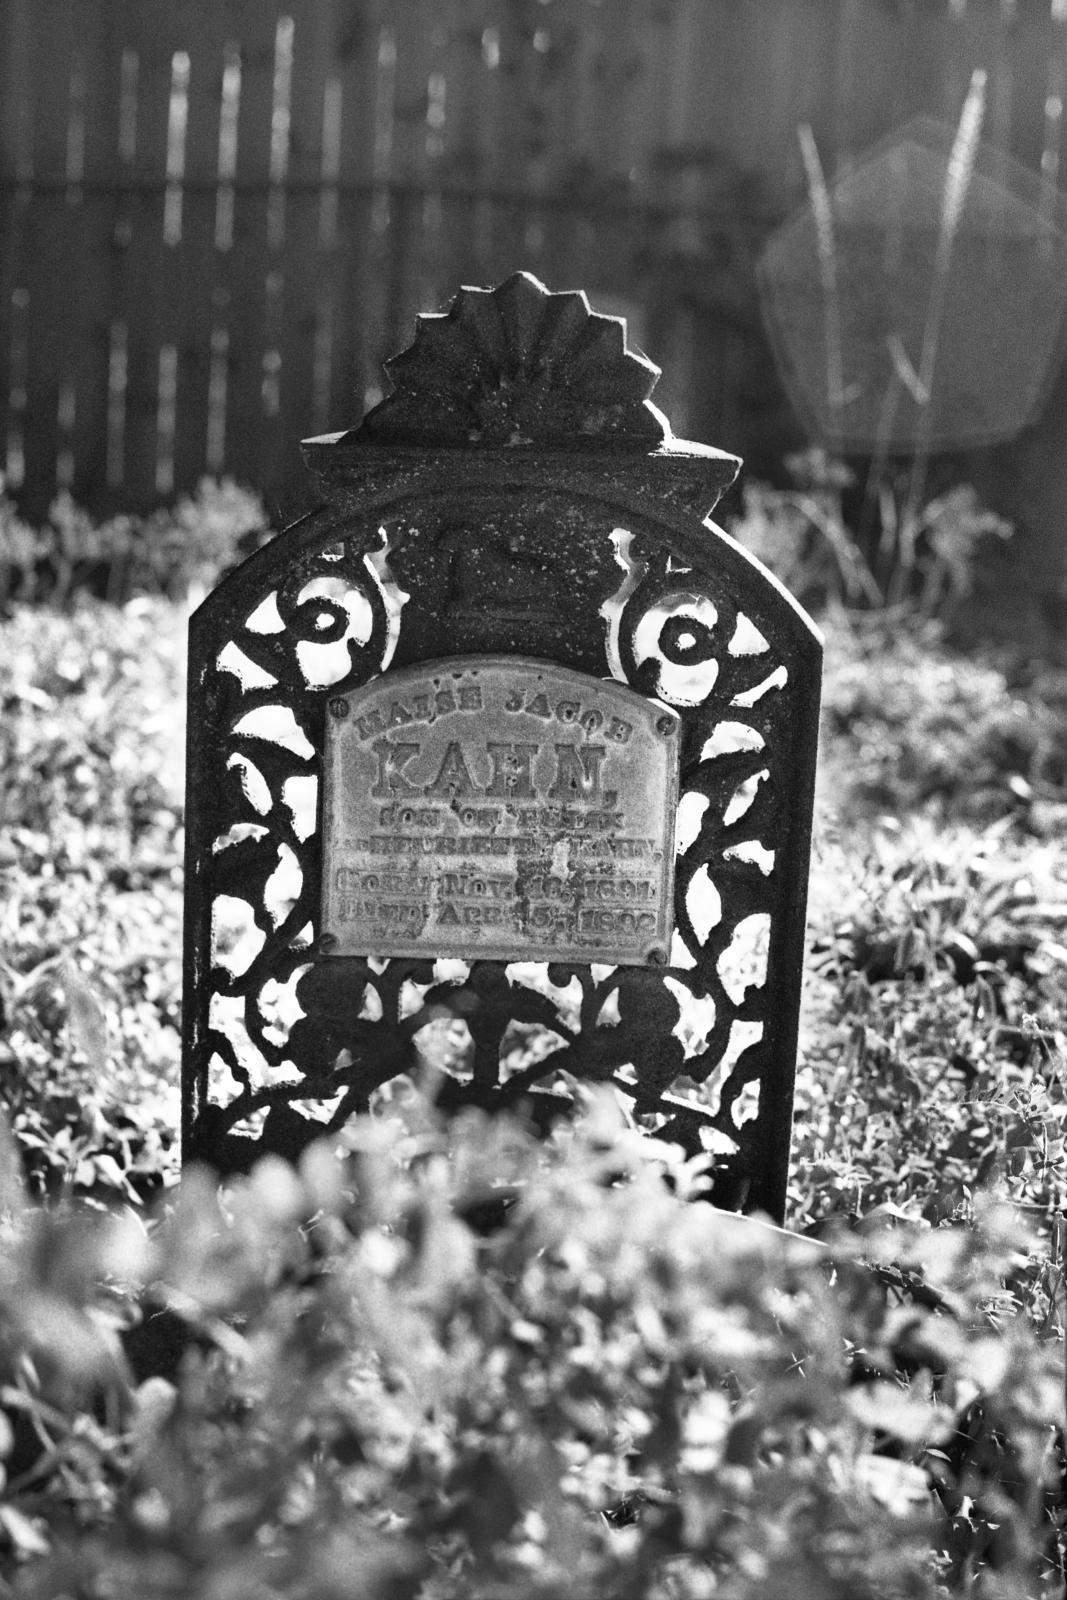 We had to know who we were; We had to know who we weren't -  Jewish Child's Grave   Plaquemine, Louisiana 